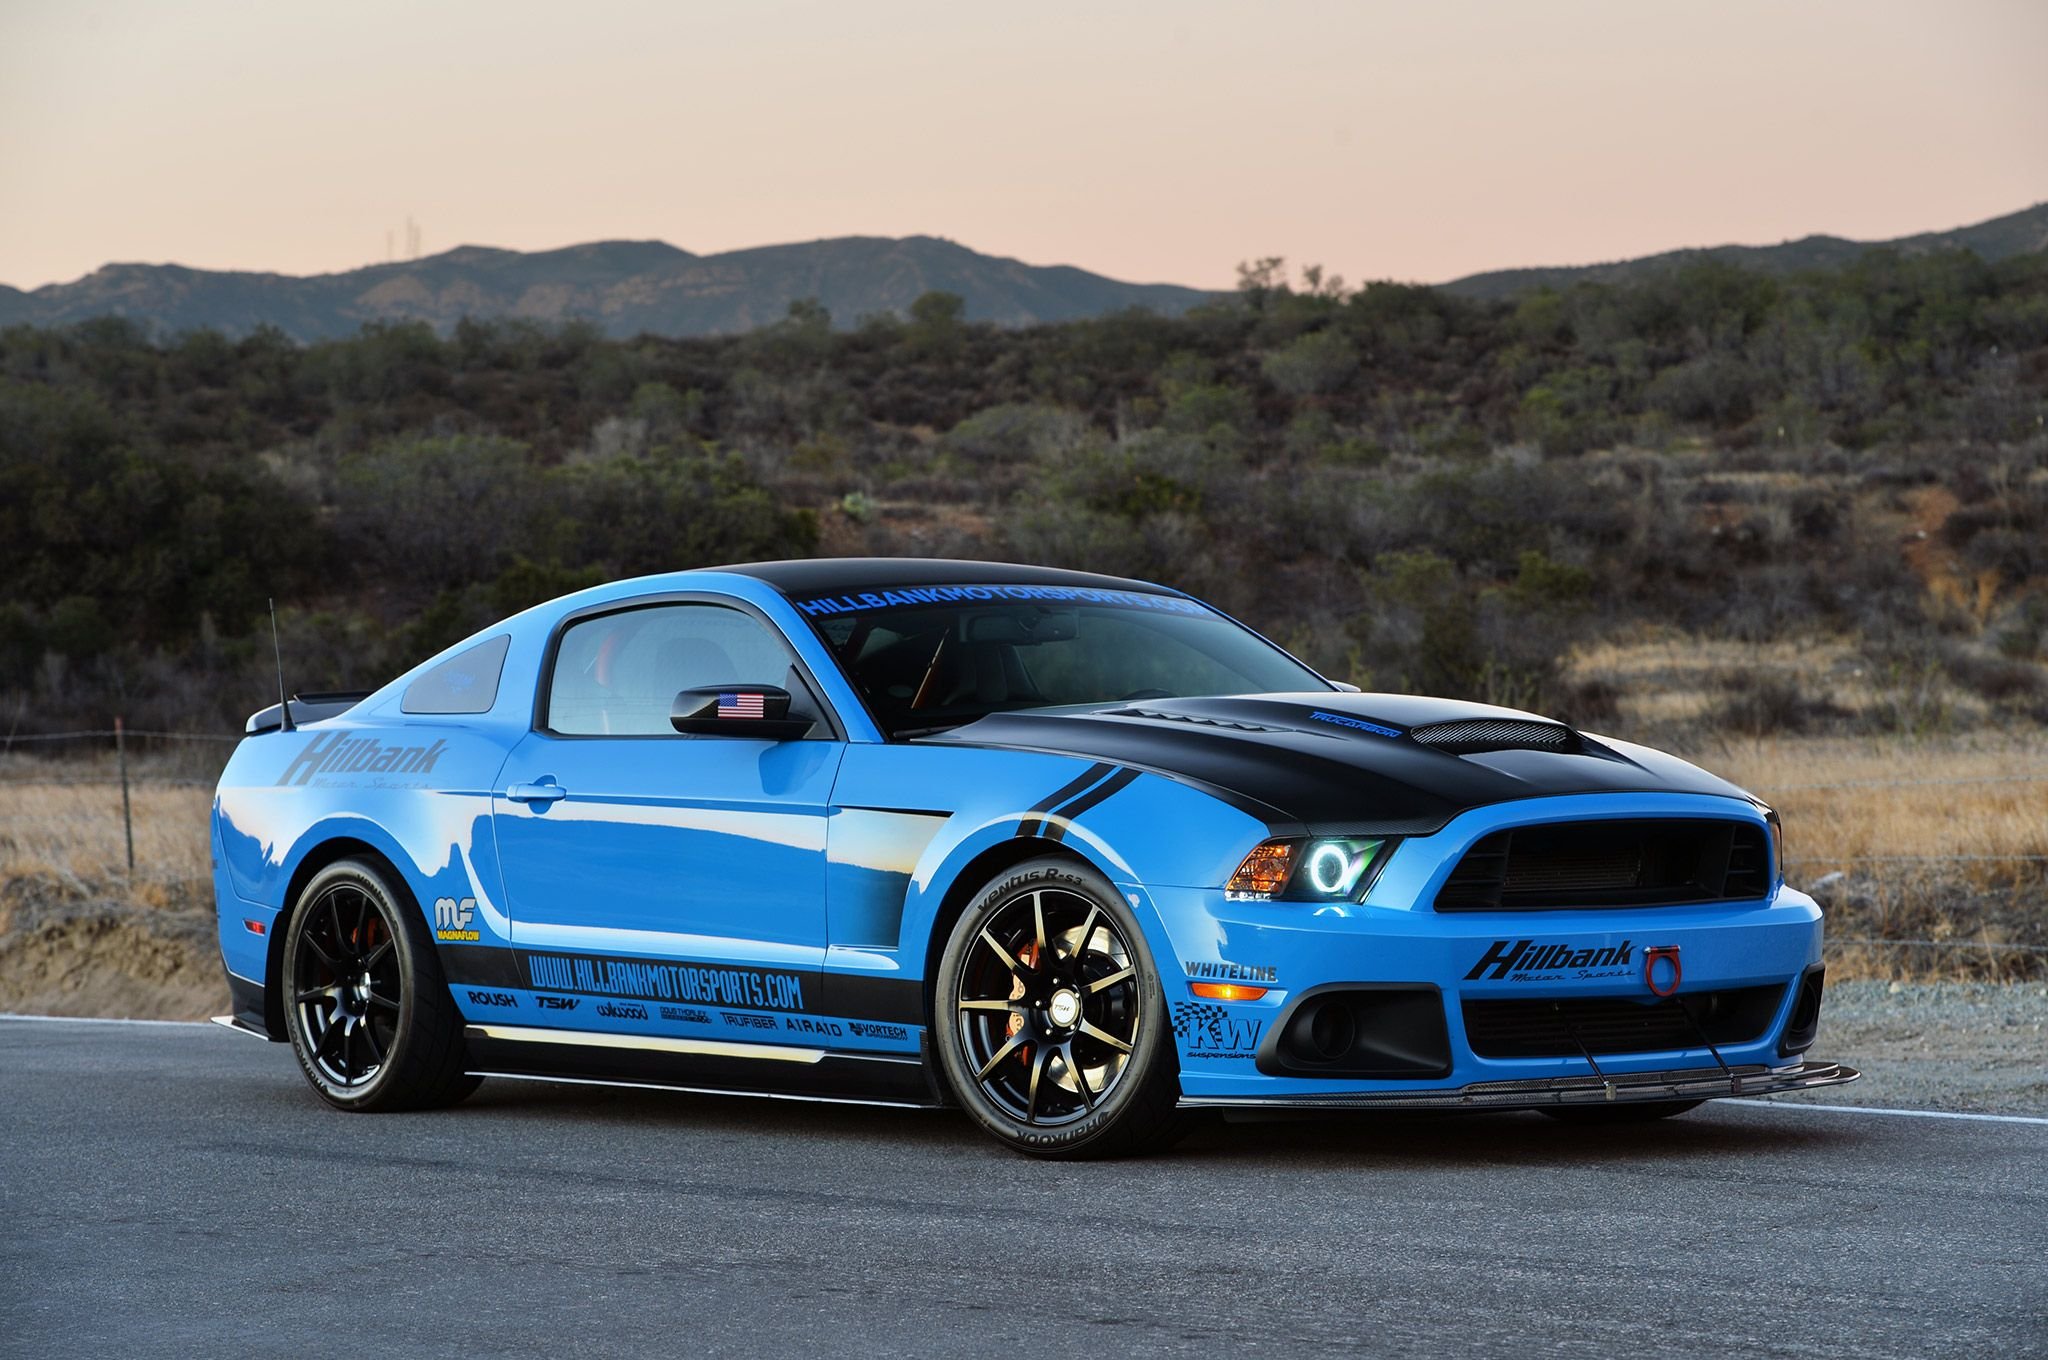 modified,-2012,-Grabber,-Blue,-Ford,-Mustang,-Gt,-Cars-...